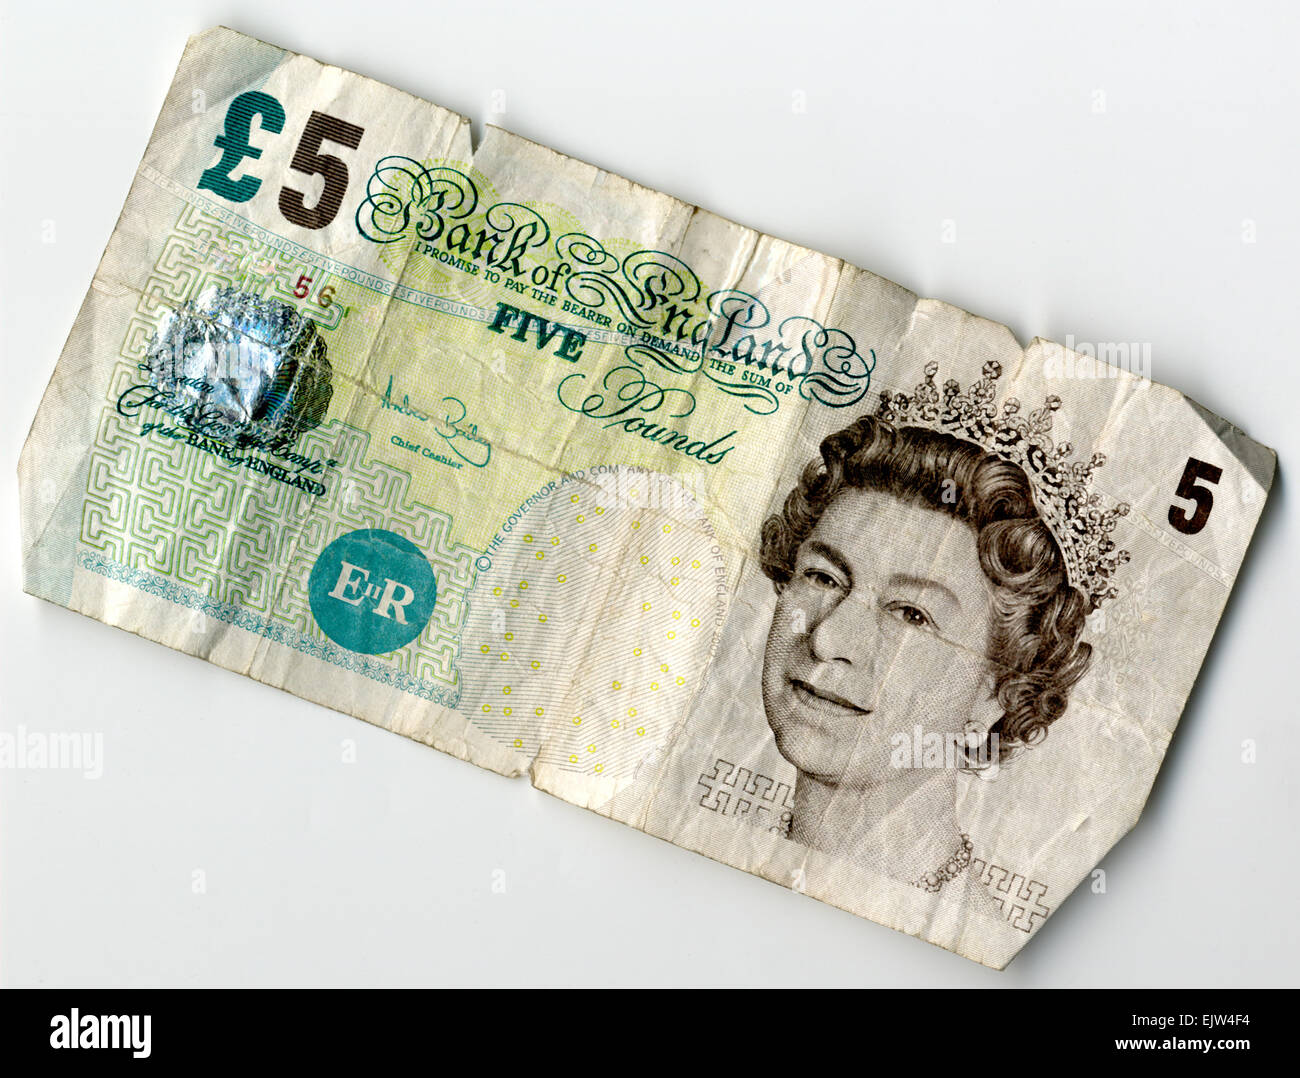 Used Old £5 Pound Note, front view Stock Photo